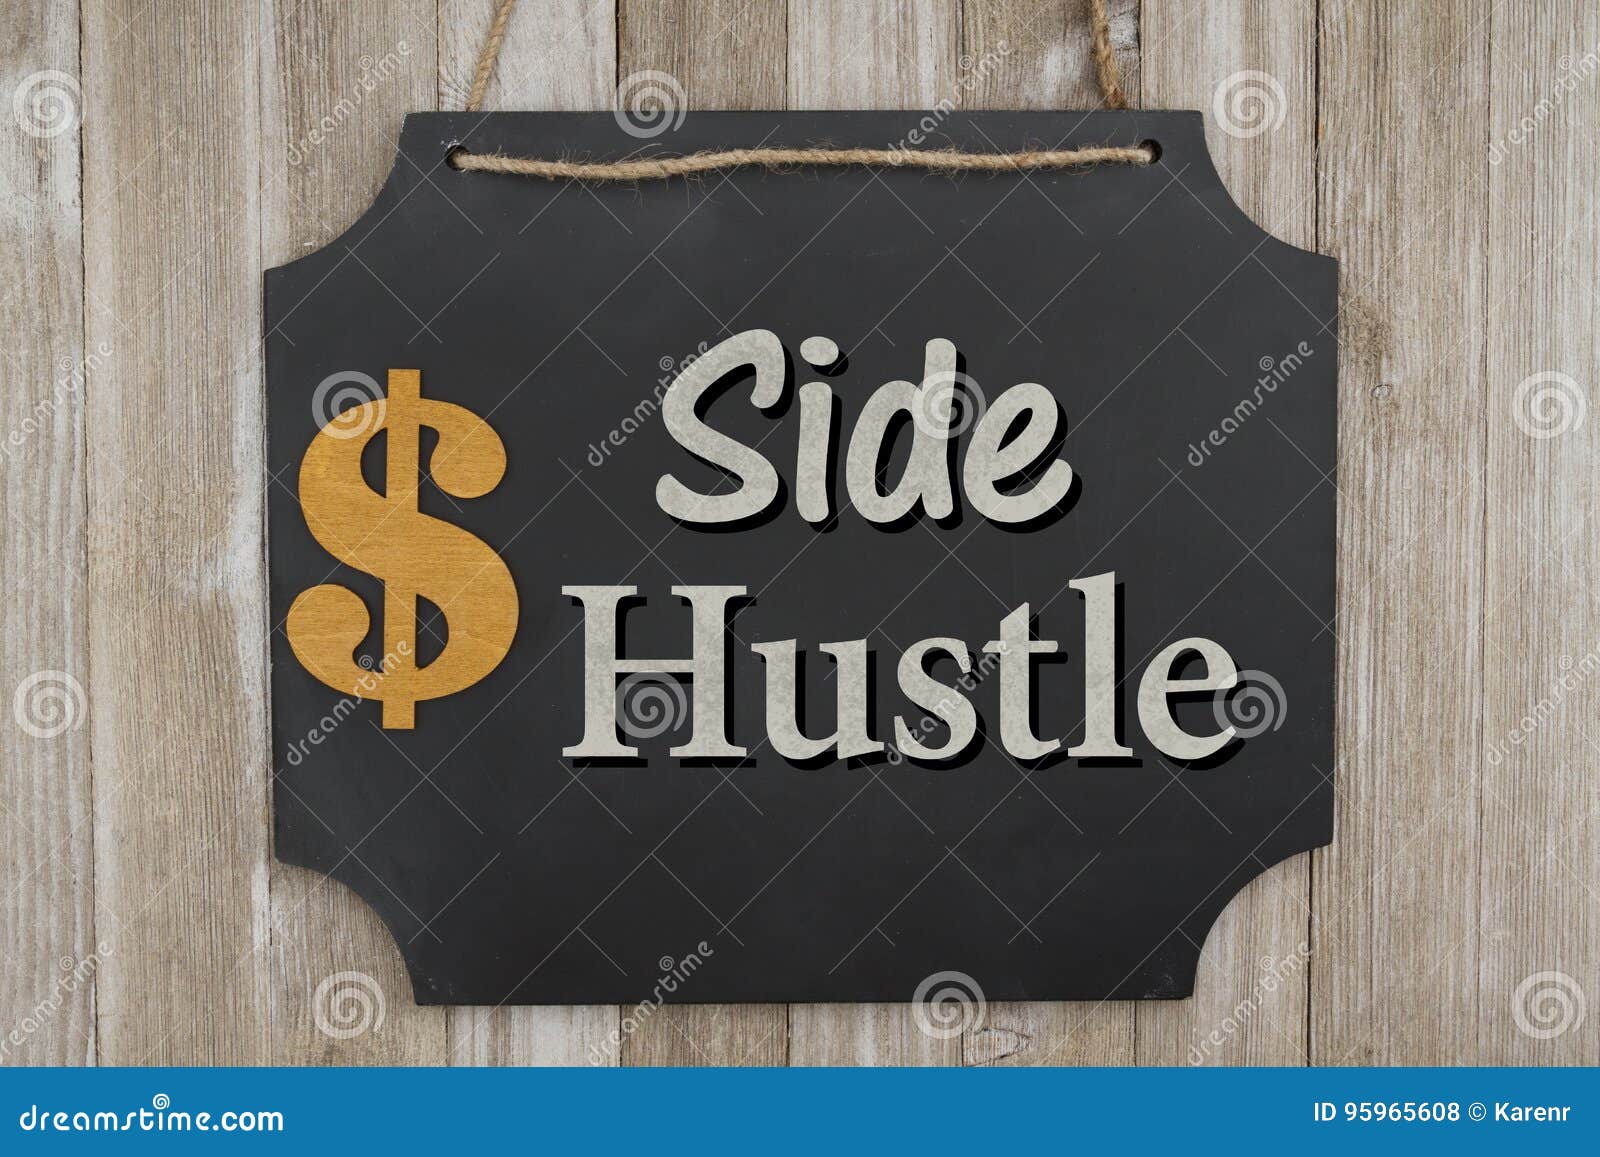 making money with your side hustle